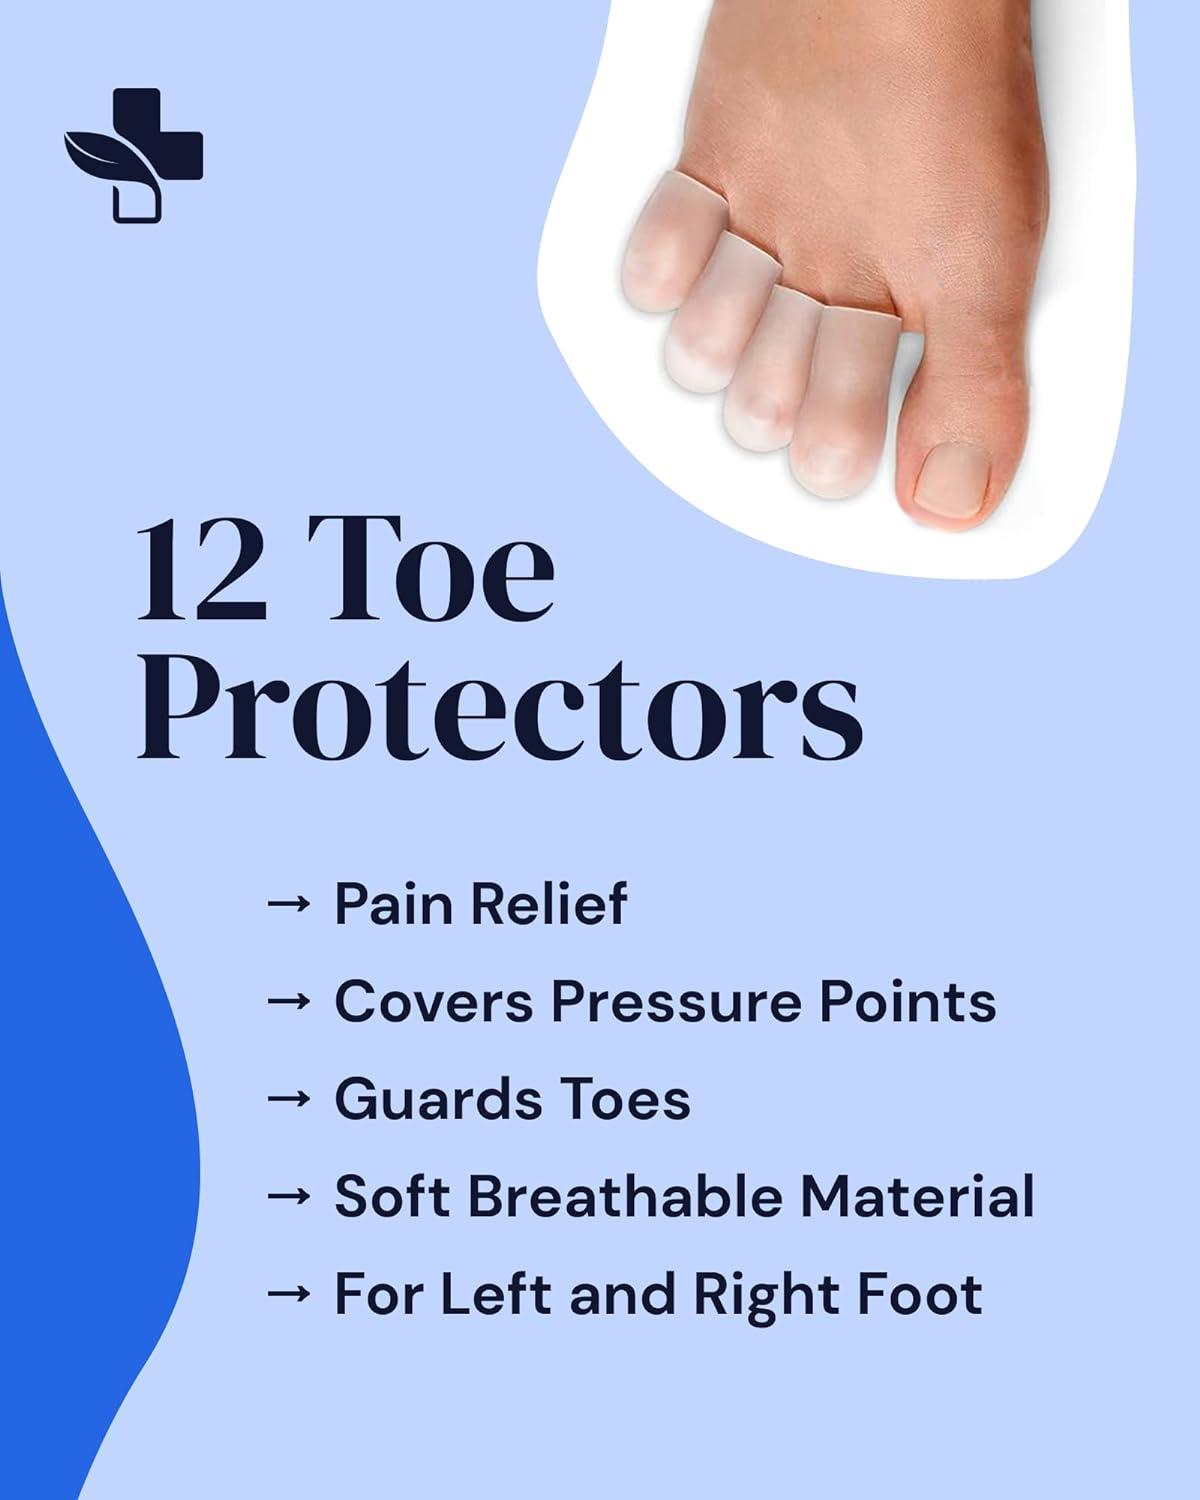 Gel Toe Protector Cap,Prevent Calluses,Corn,blisters,Hammer Toe (10 Pack)  Soft Toe Covers Prevent Bunions and Other Toe Problems Toe Sleeves